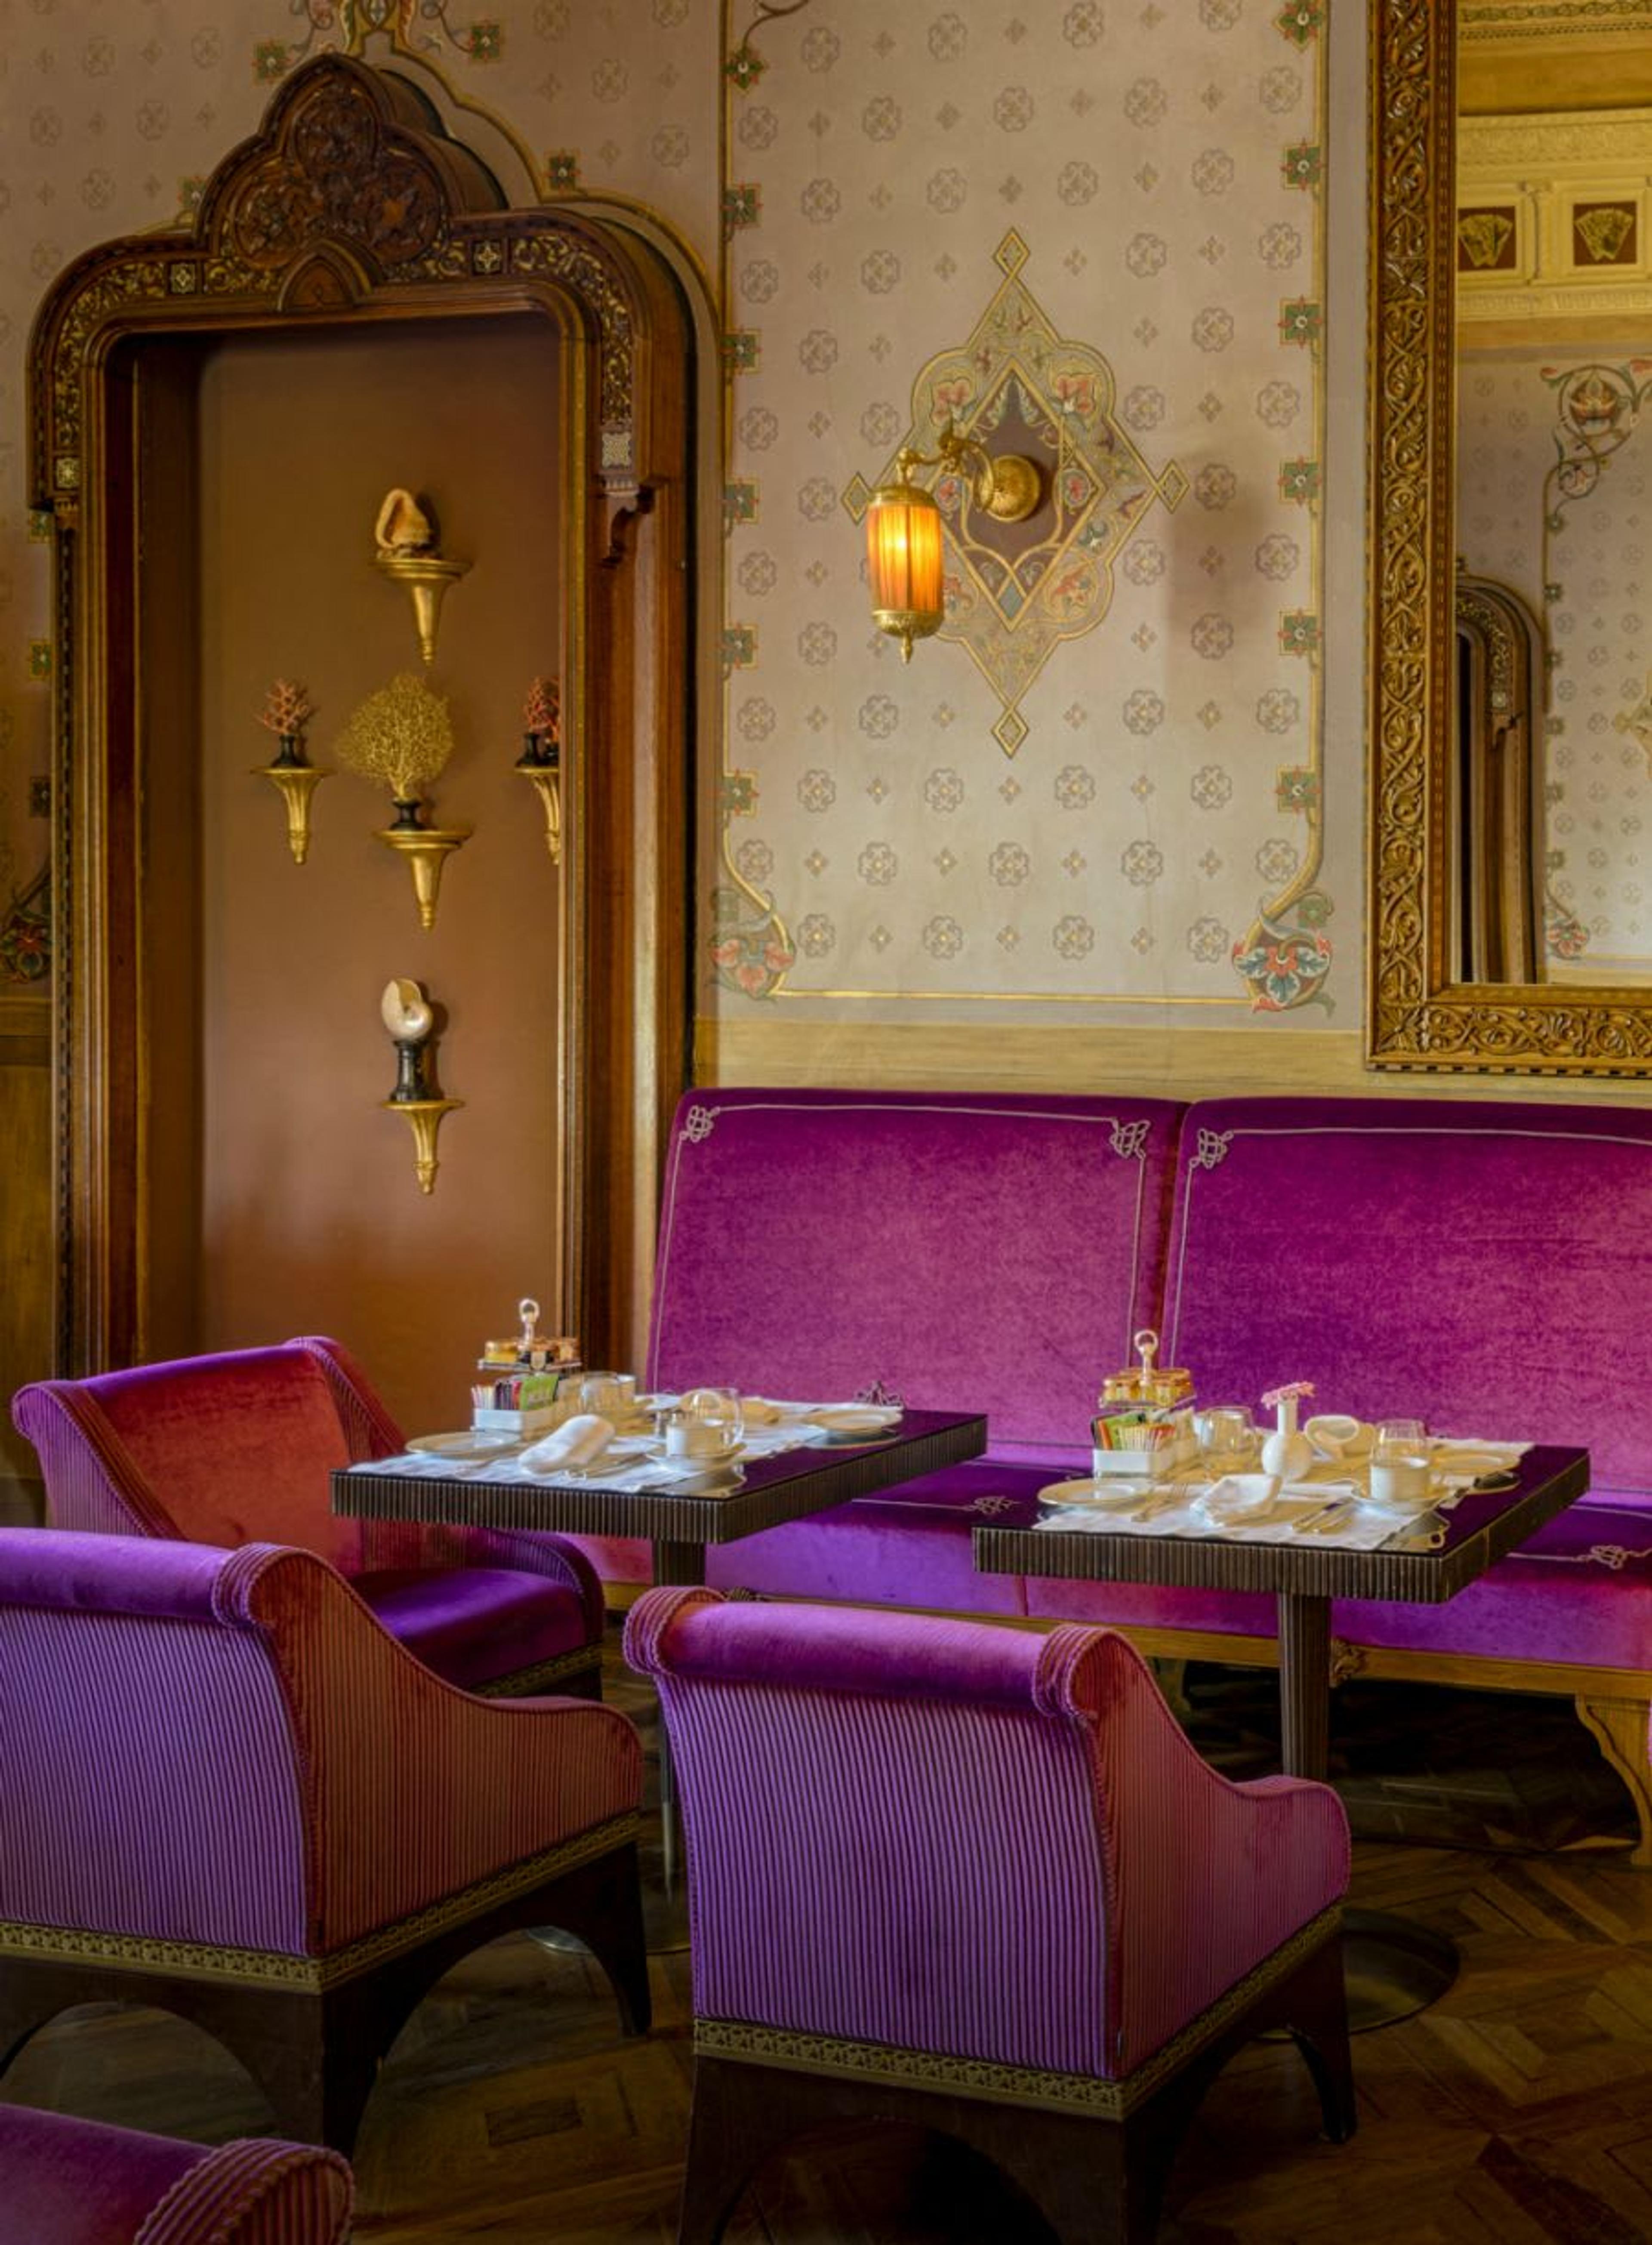 Breakfast in the villa's Cards Room - Purple velvet seating, delicate golden frescoes, parquet flooring and hand-carved wood framed mirrors hanging on the walls.